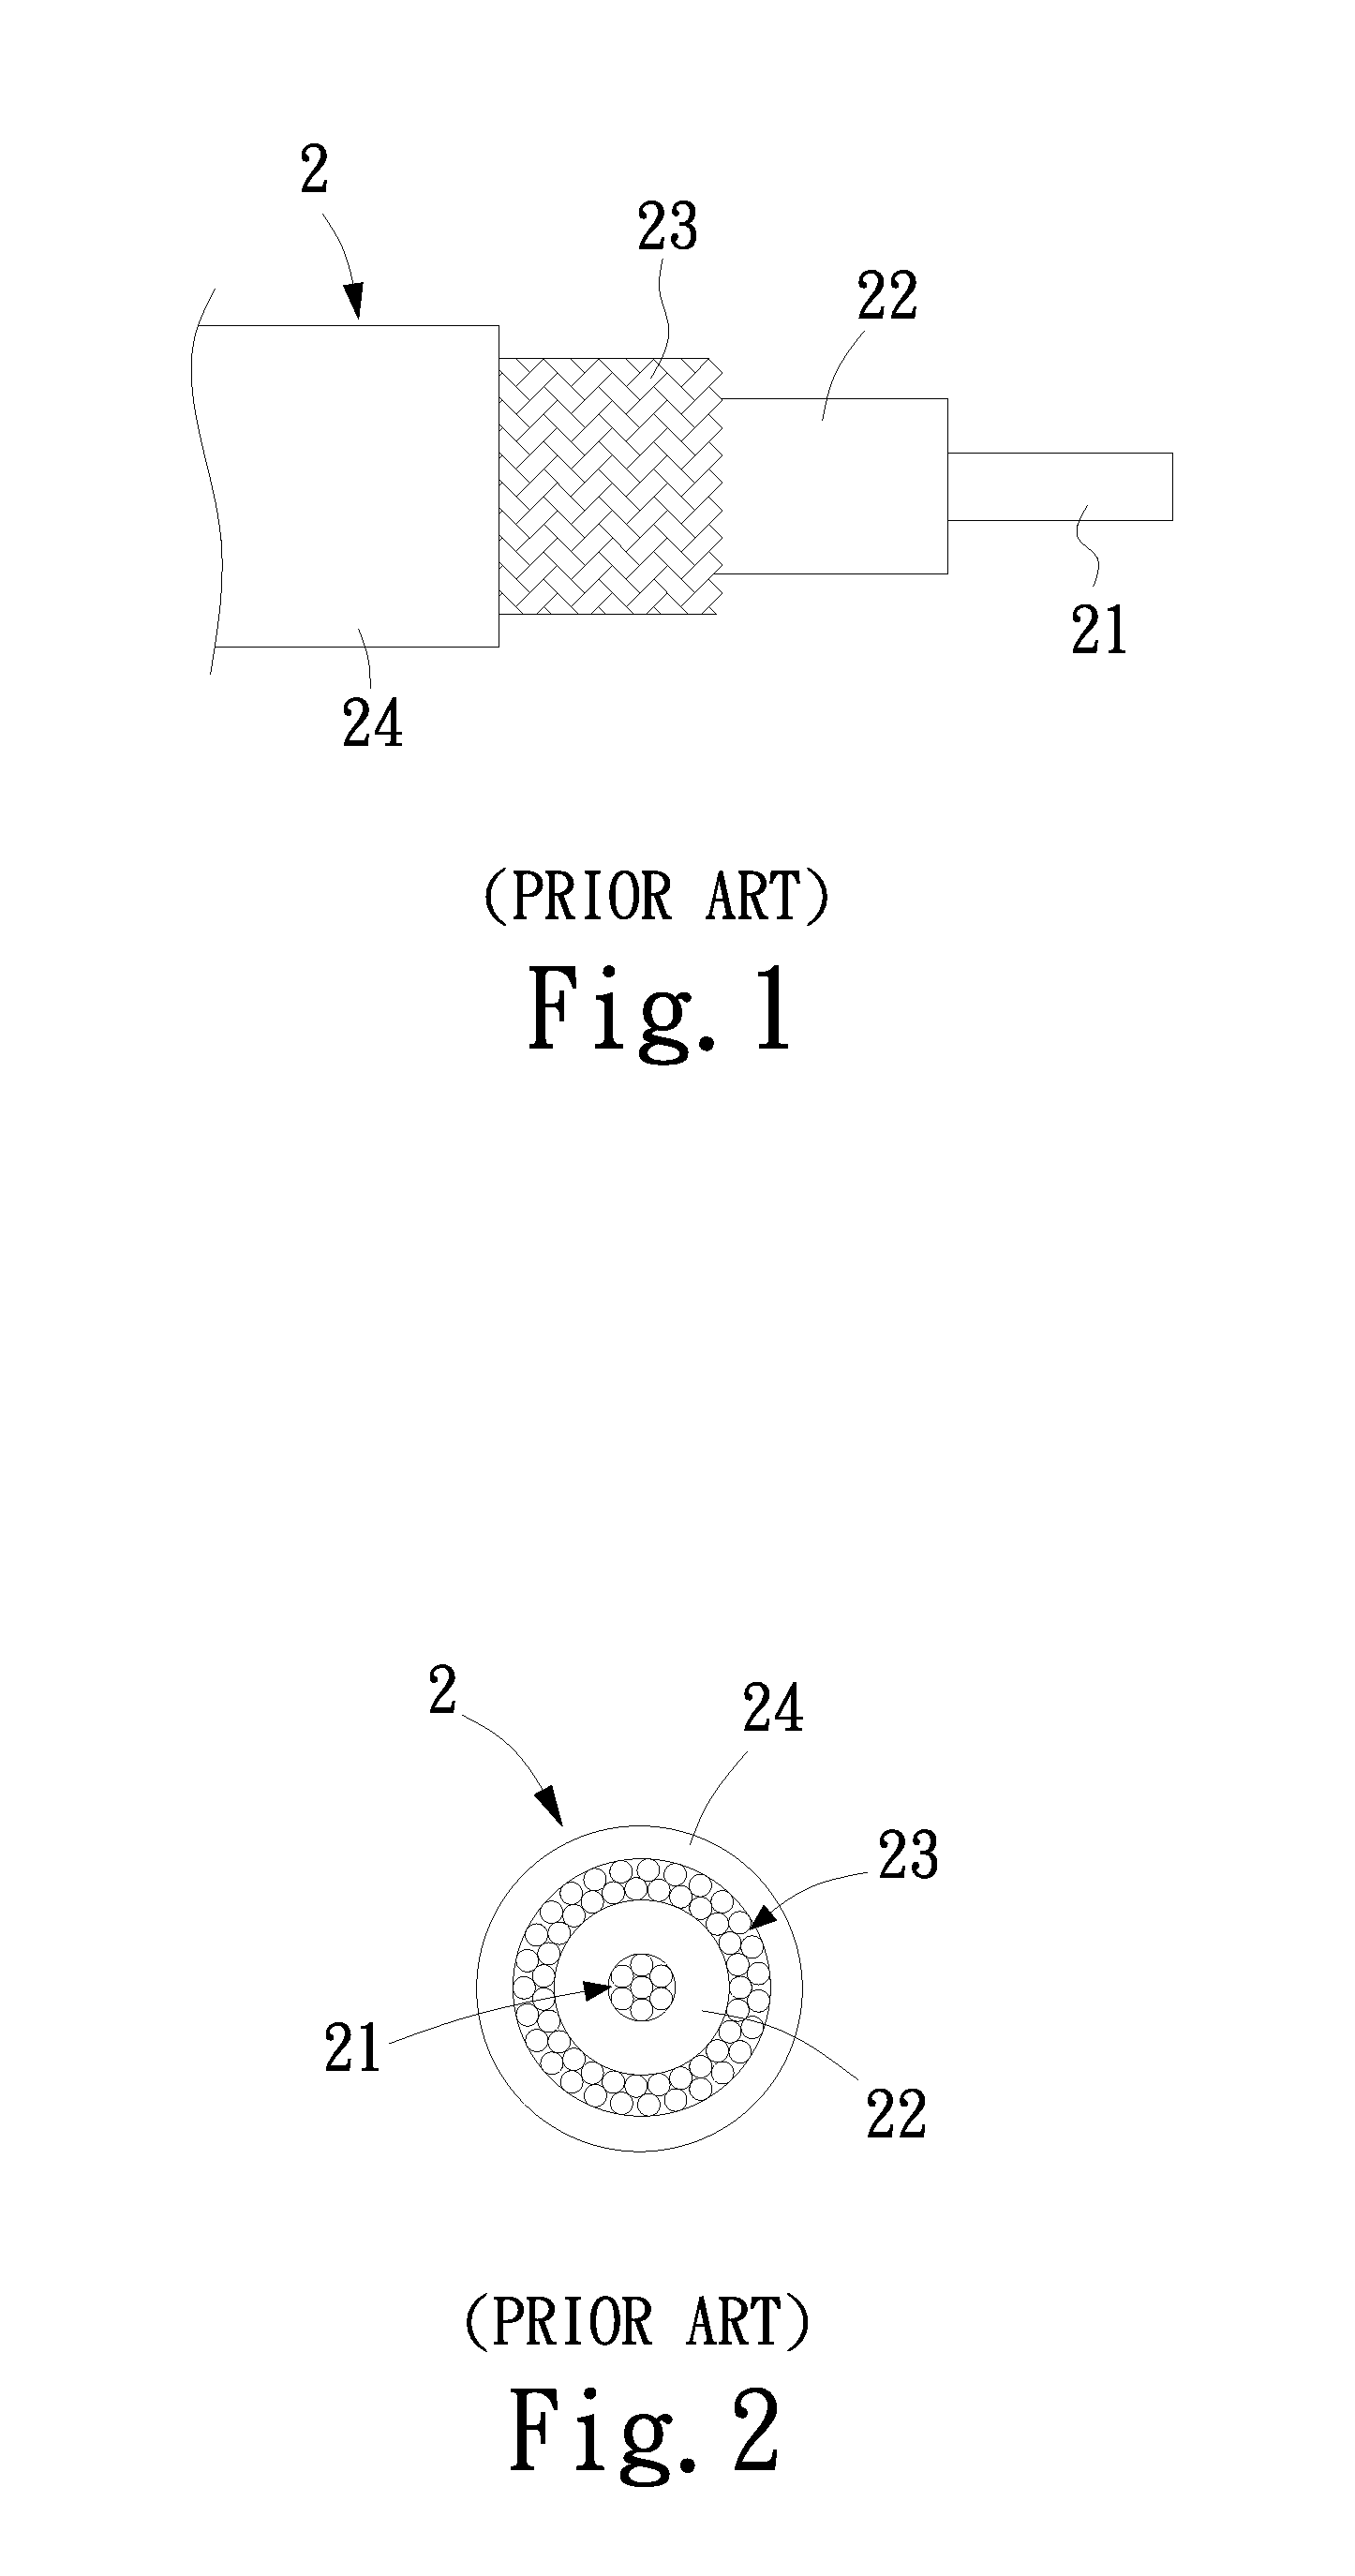 Coaxial cable structure with extruded shielding layer